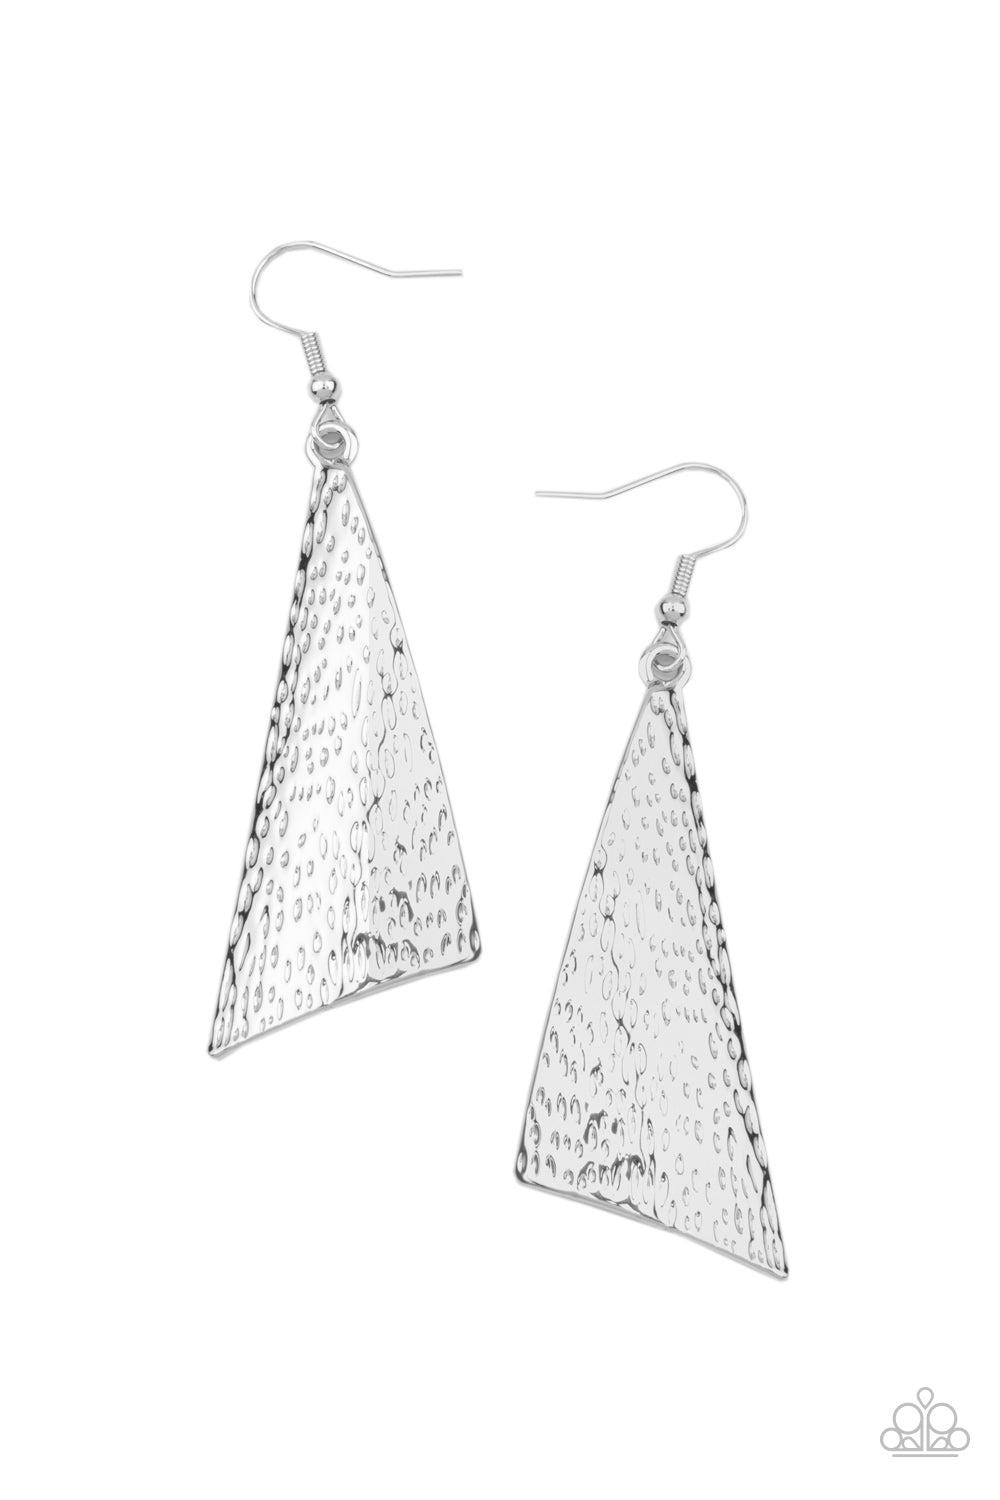 Paparazzi Accessories - Ready The Troops #E433 - Silver Earrings